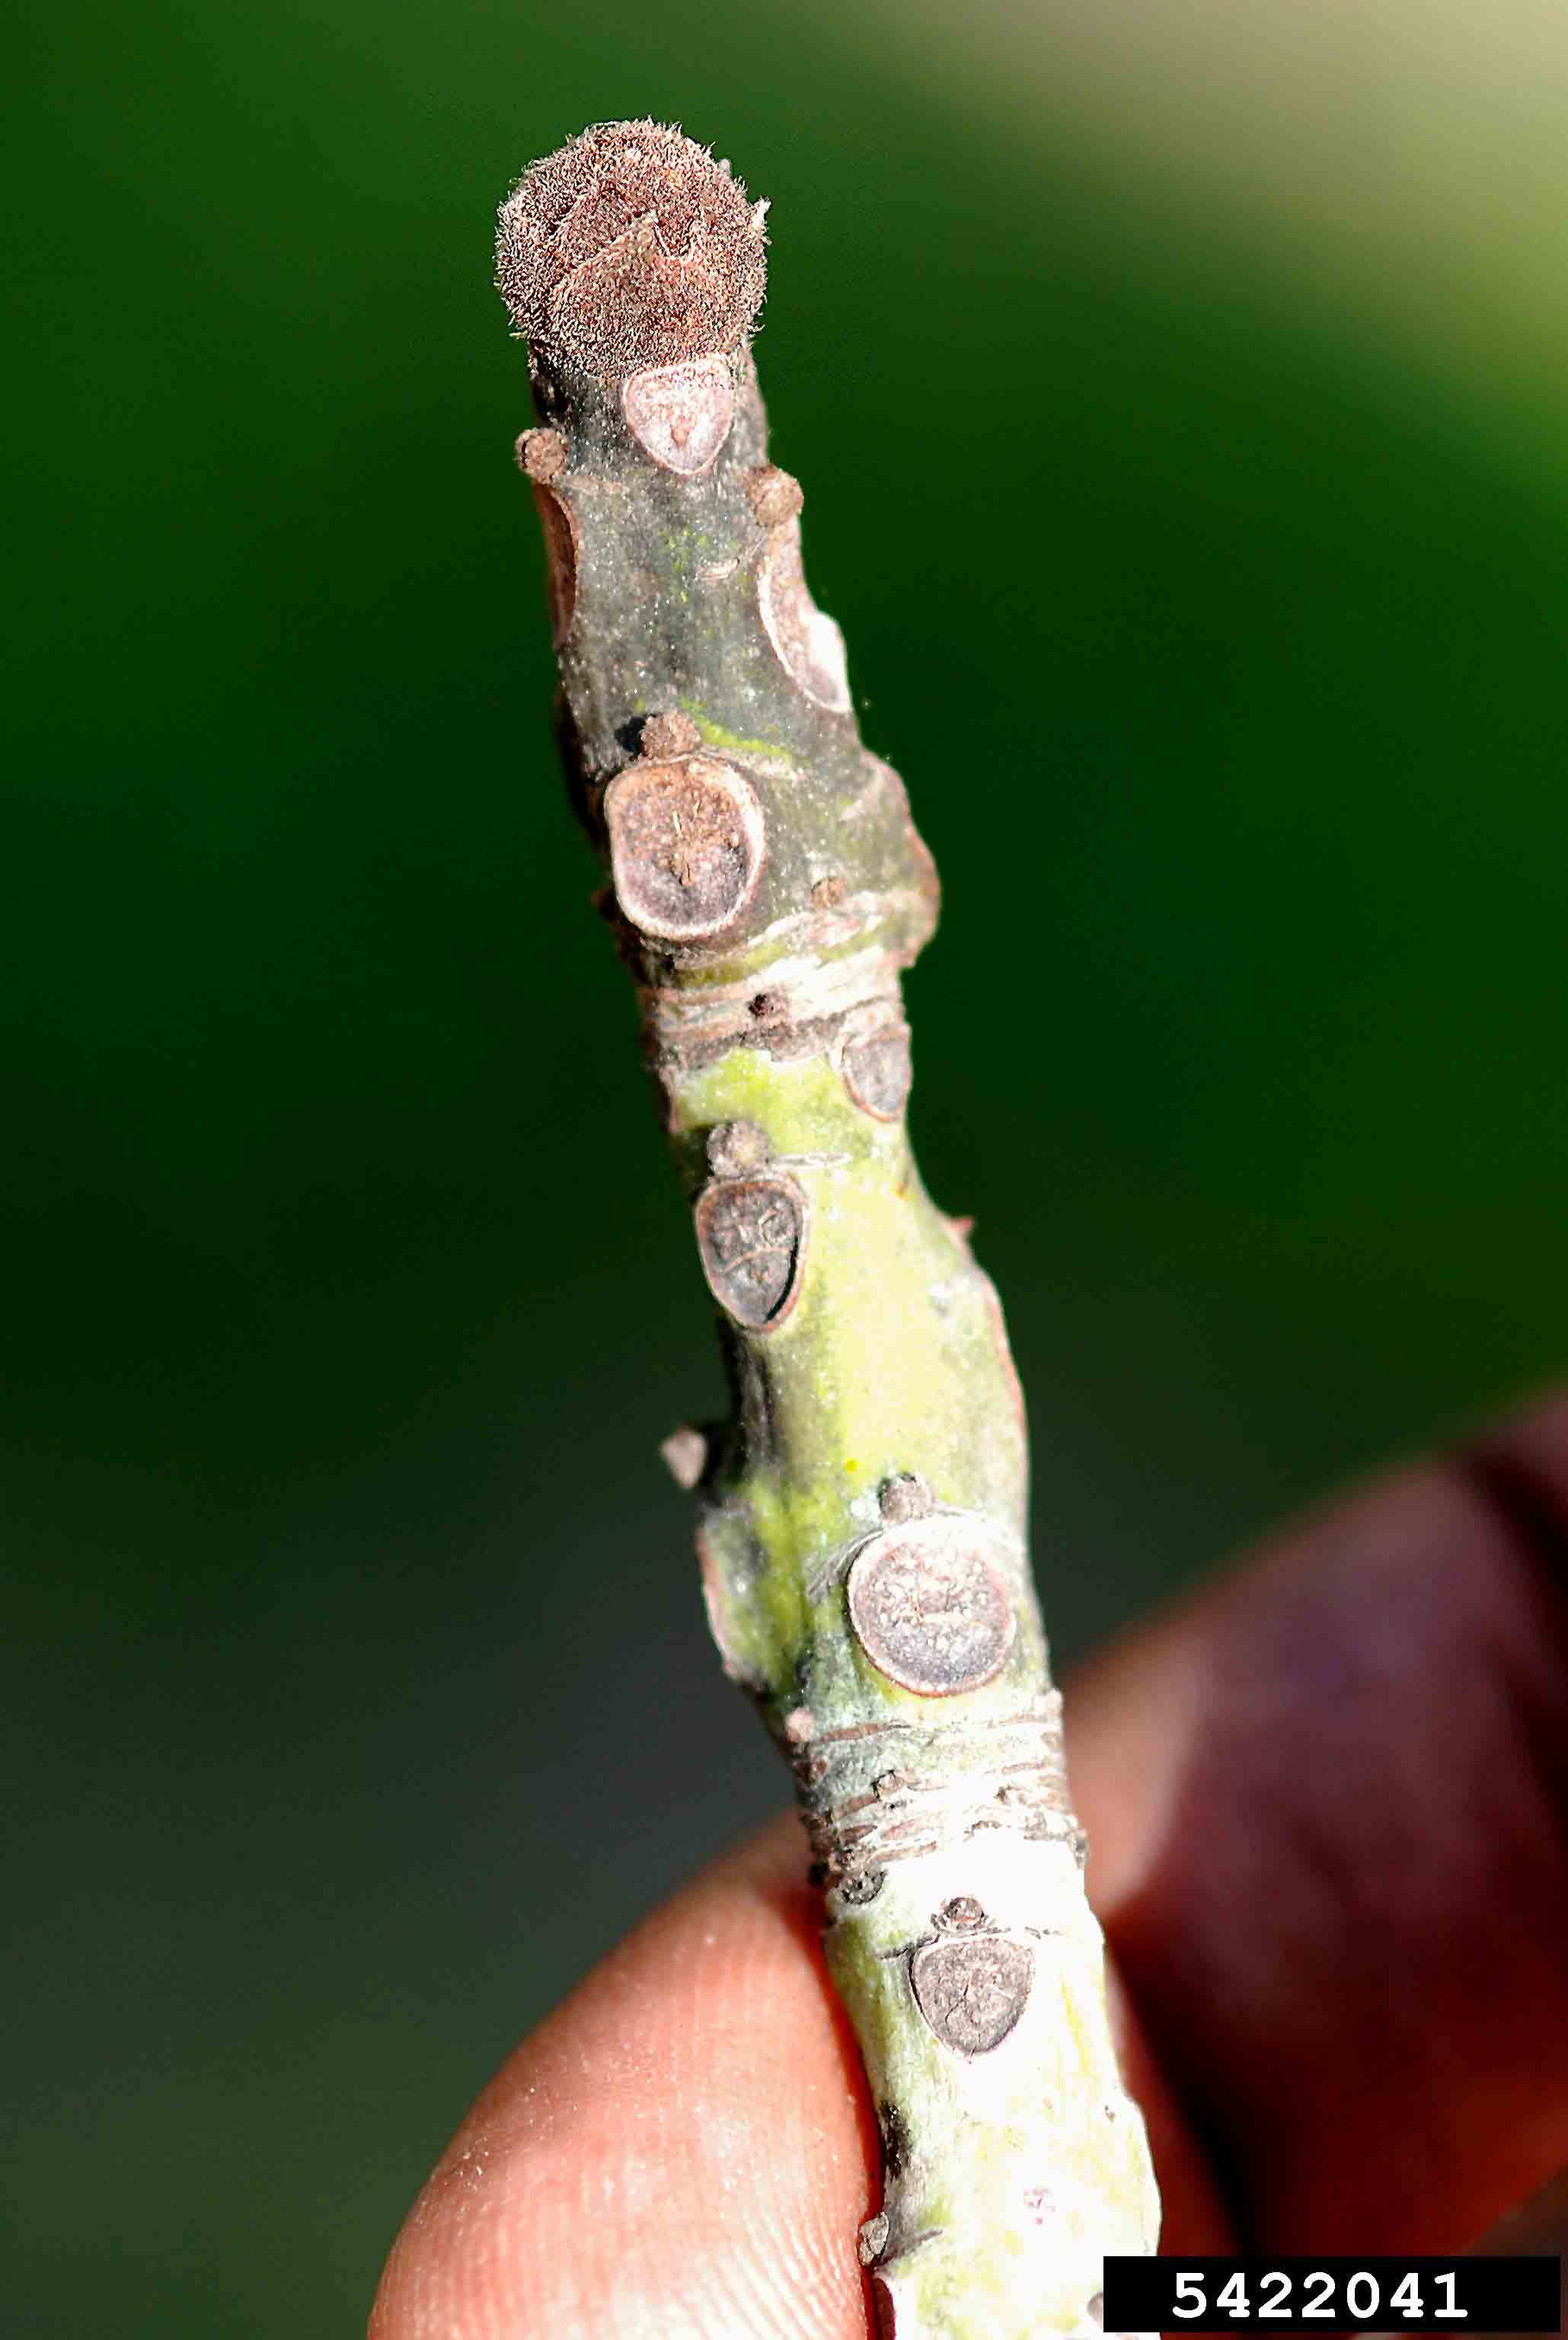 Chinese parasoltree twig, showing bud and leaf scars